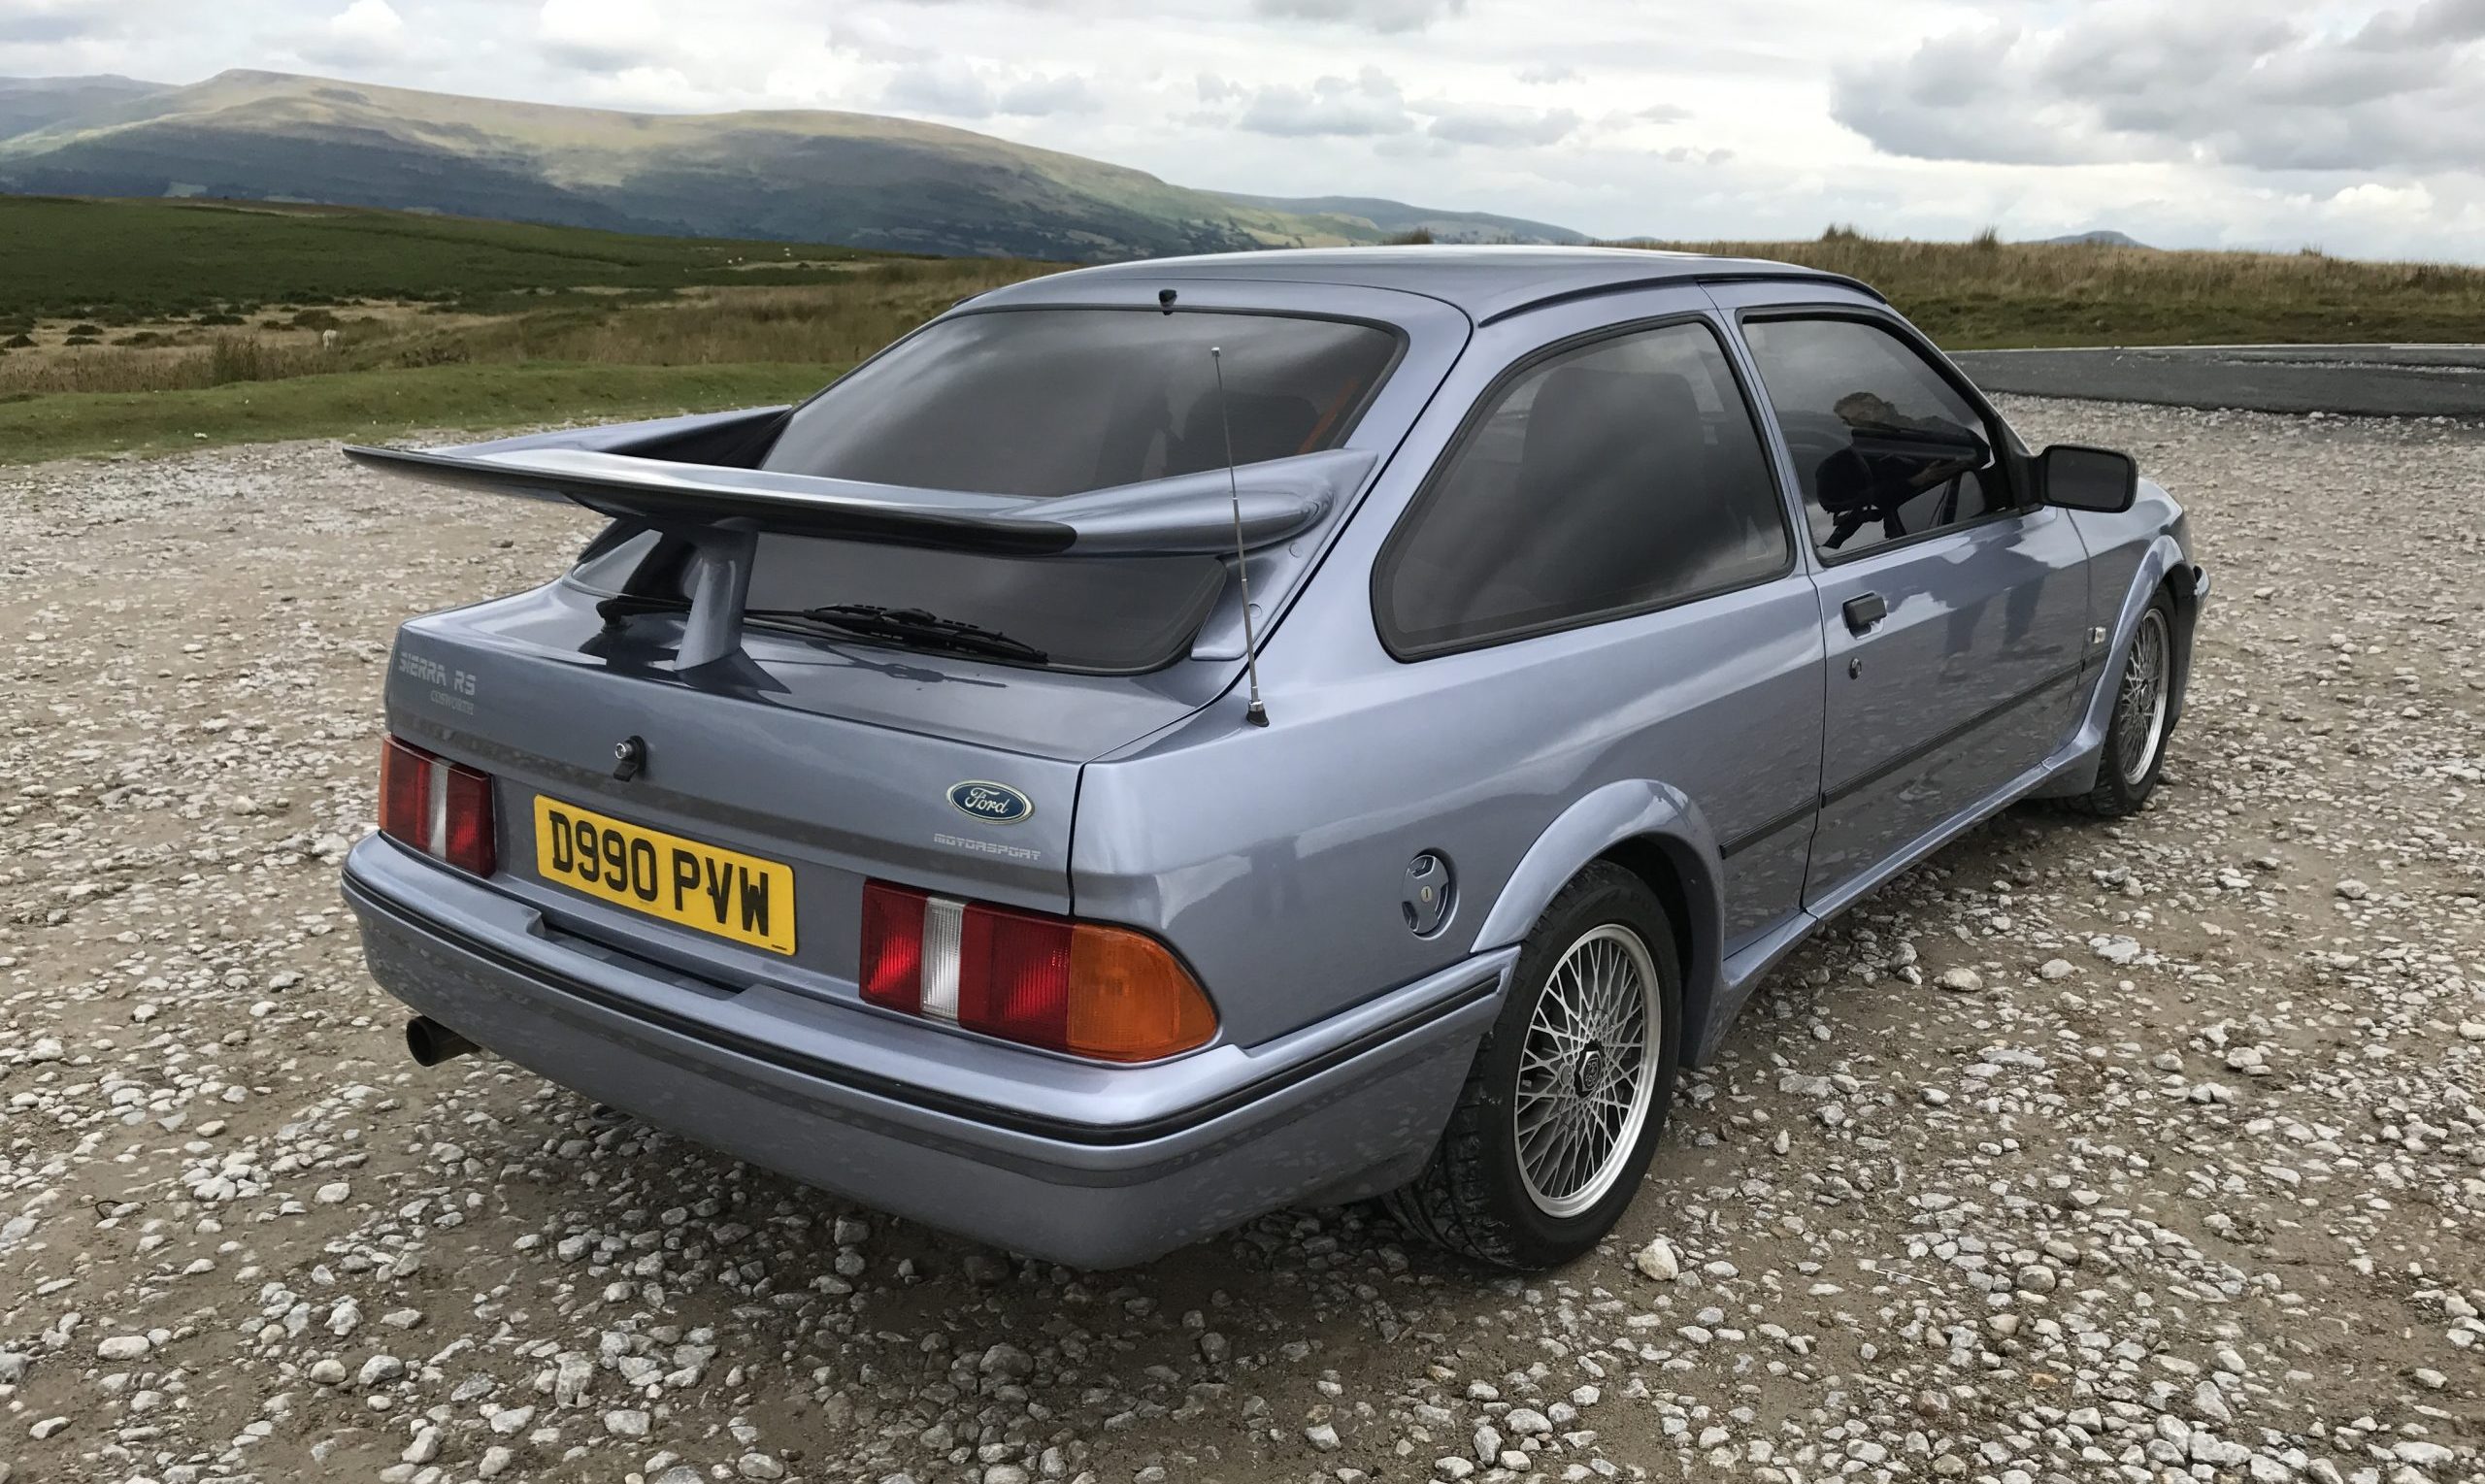 Tracking down my old Ford Sierra Cosworth after 31 years was easier than you’d imagine